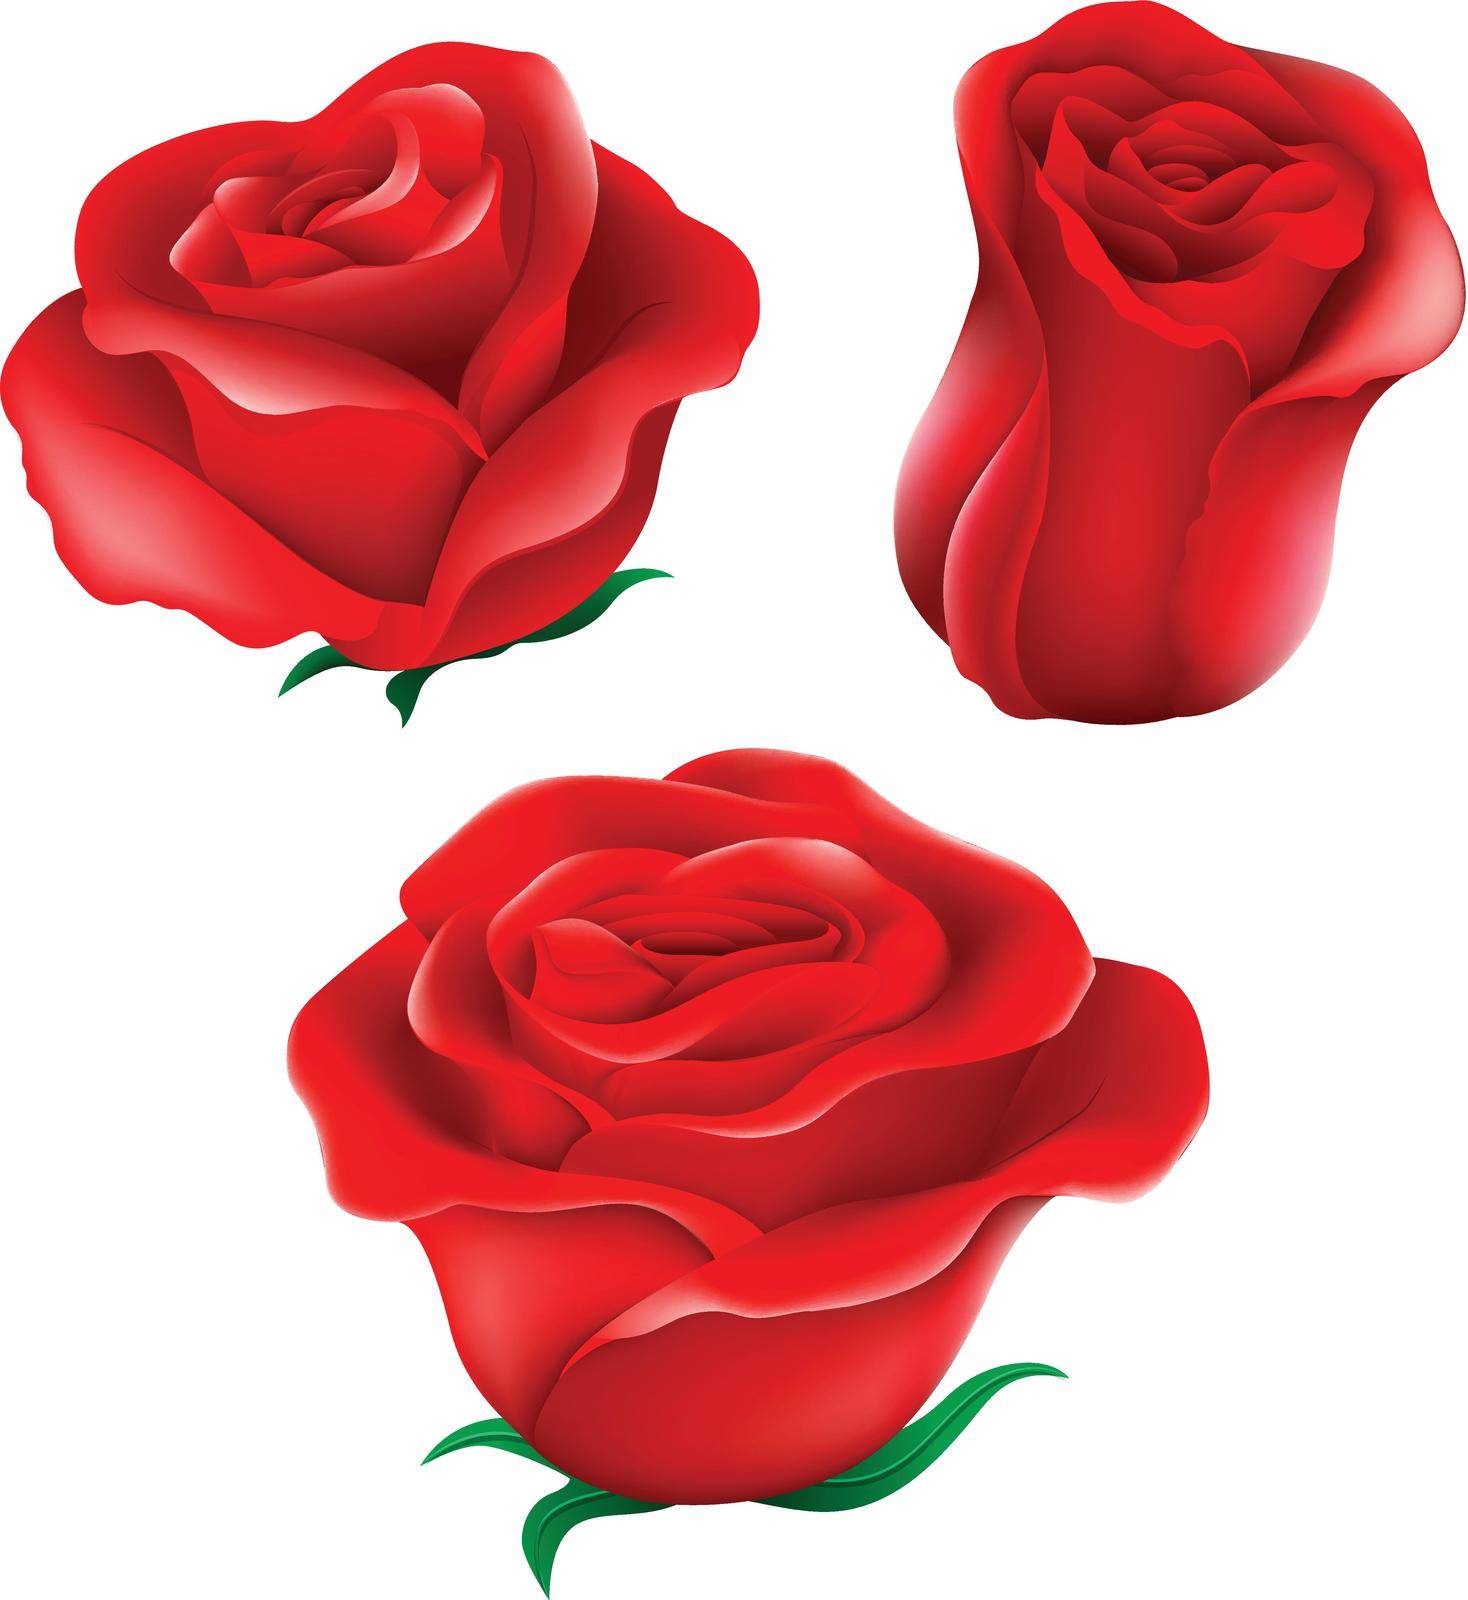 Illustration of the red roses on a white background